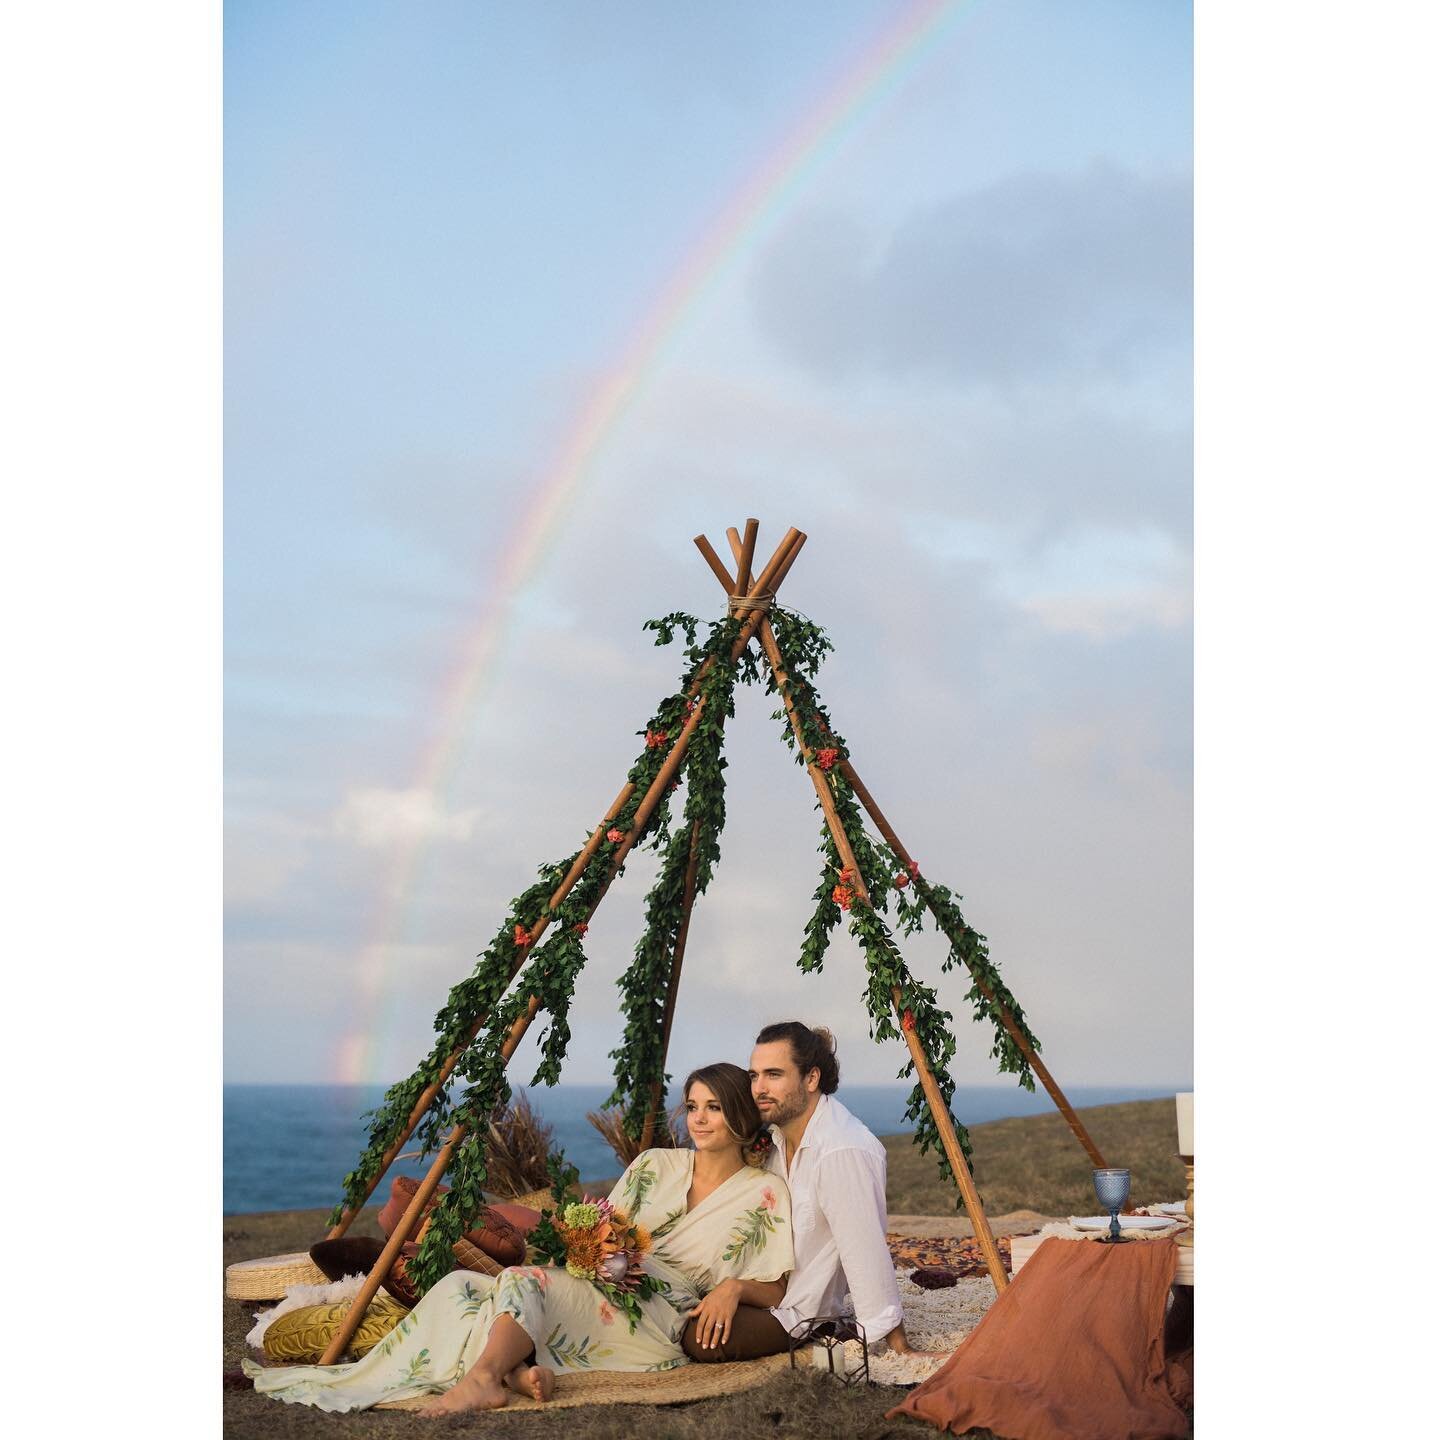 This amazing collaborative shoot was truly magical! Couldn&rsquo;t have timed the rainbow better if we tried! Thank you @mauiluxepicnics For organizing everything! 🌈🌈
.
.
.
.

Hair &amp; Makeup: @islandgirlpinups
Dresses: @cobaltandtawny
Florals: @